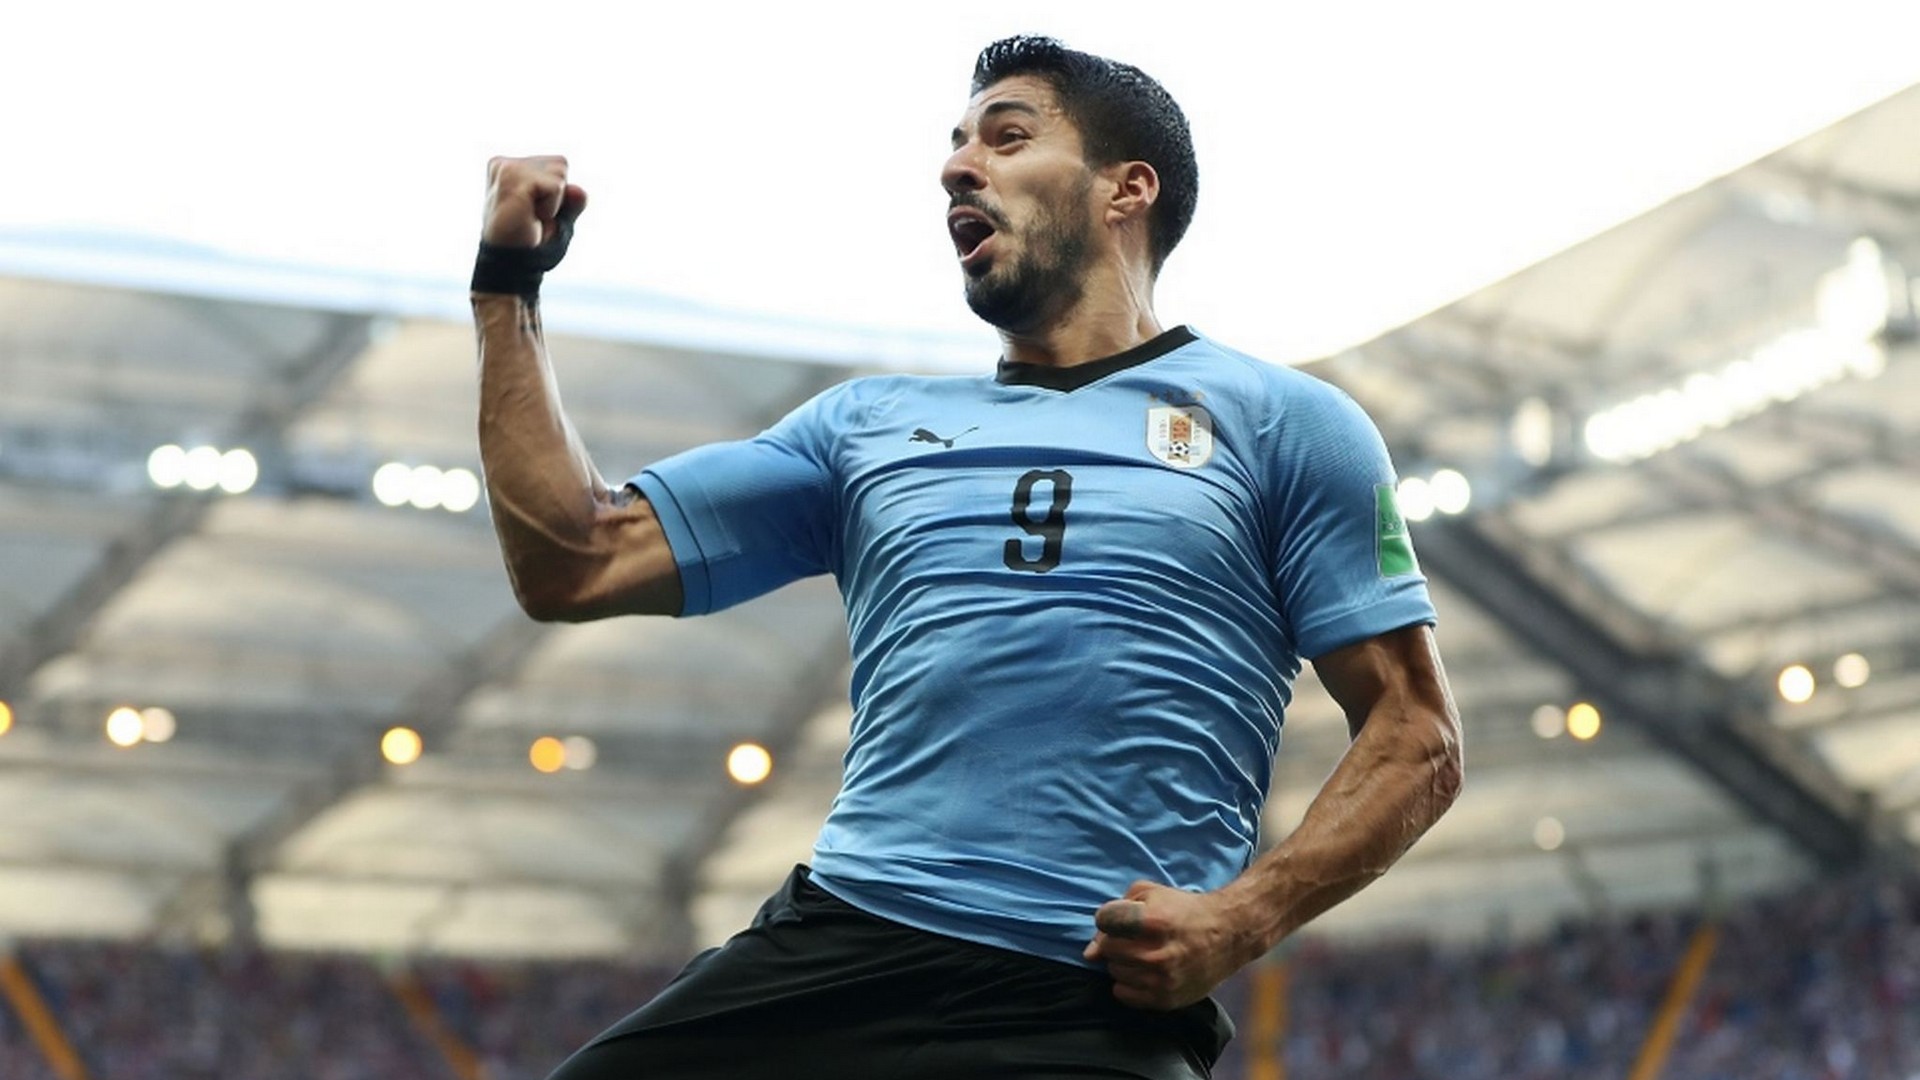 Luis Suarez Uruguay Desktop Wallpaper with resolution 1920X1080 pixel. You can use this wallpaper as background for your desktop Computer Screensavers, Android or iPhone smartphones